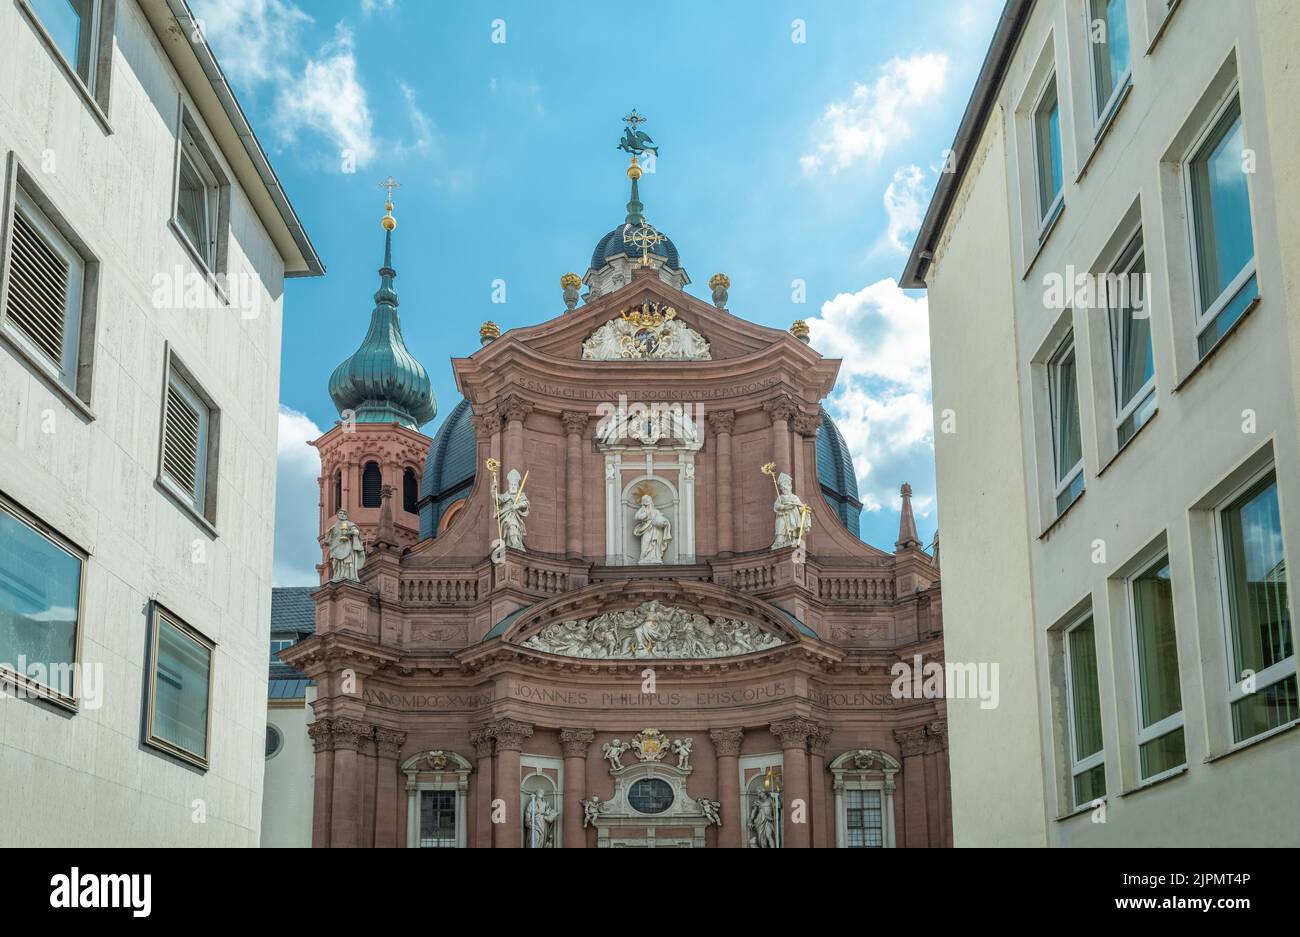 Germany, Wurzburg, view of the Baroque style facade of the Collegiate church Stock Photo